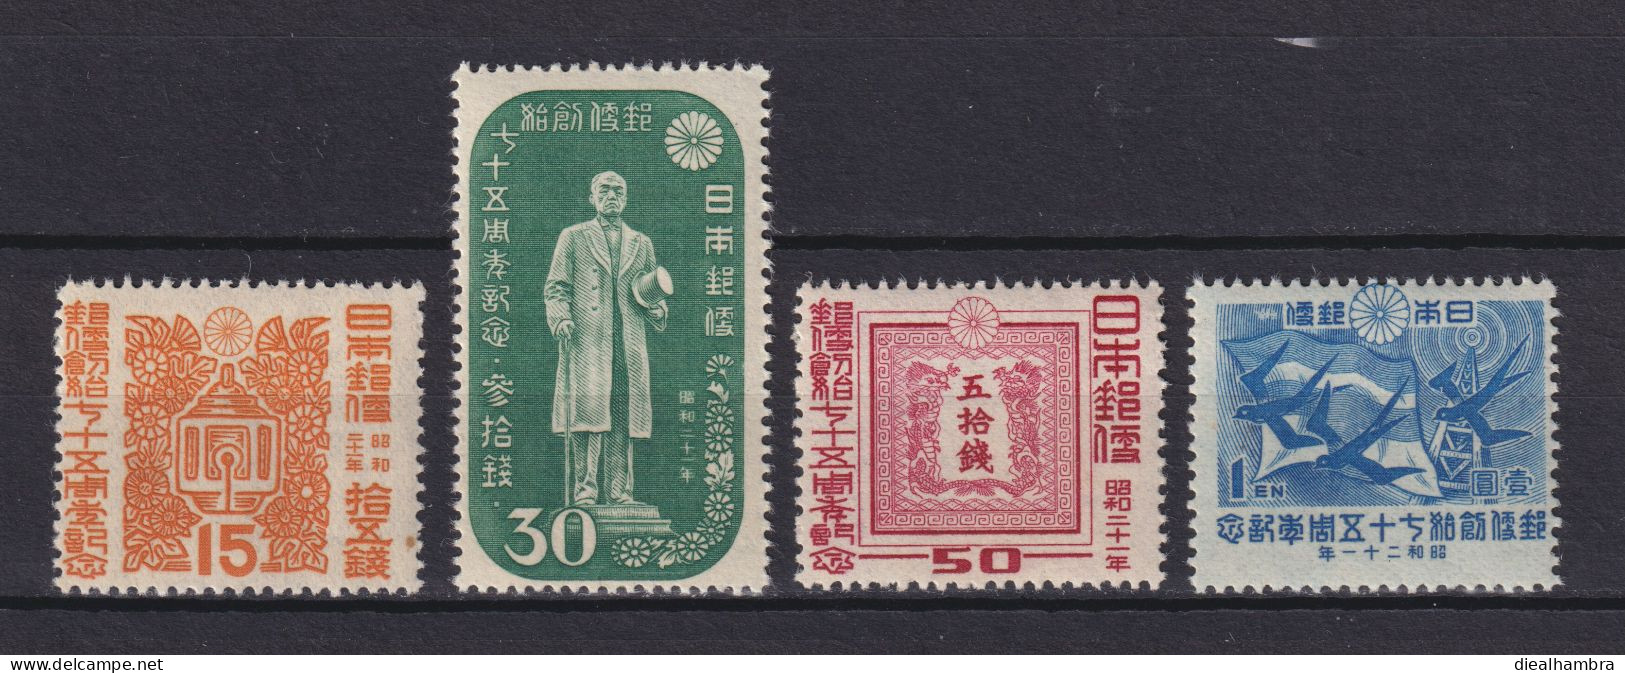 JAPAN NIPPON JAPON 75th. ANNIVERSARY OF POSTAL SERVICE 1946 / MNH / 362 A - 365 A - Unused Stamps